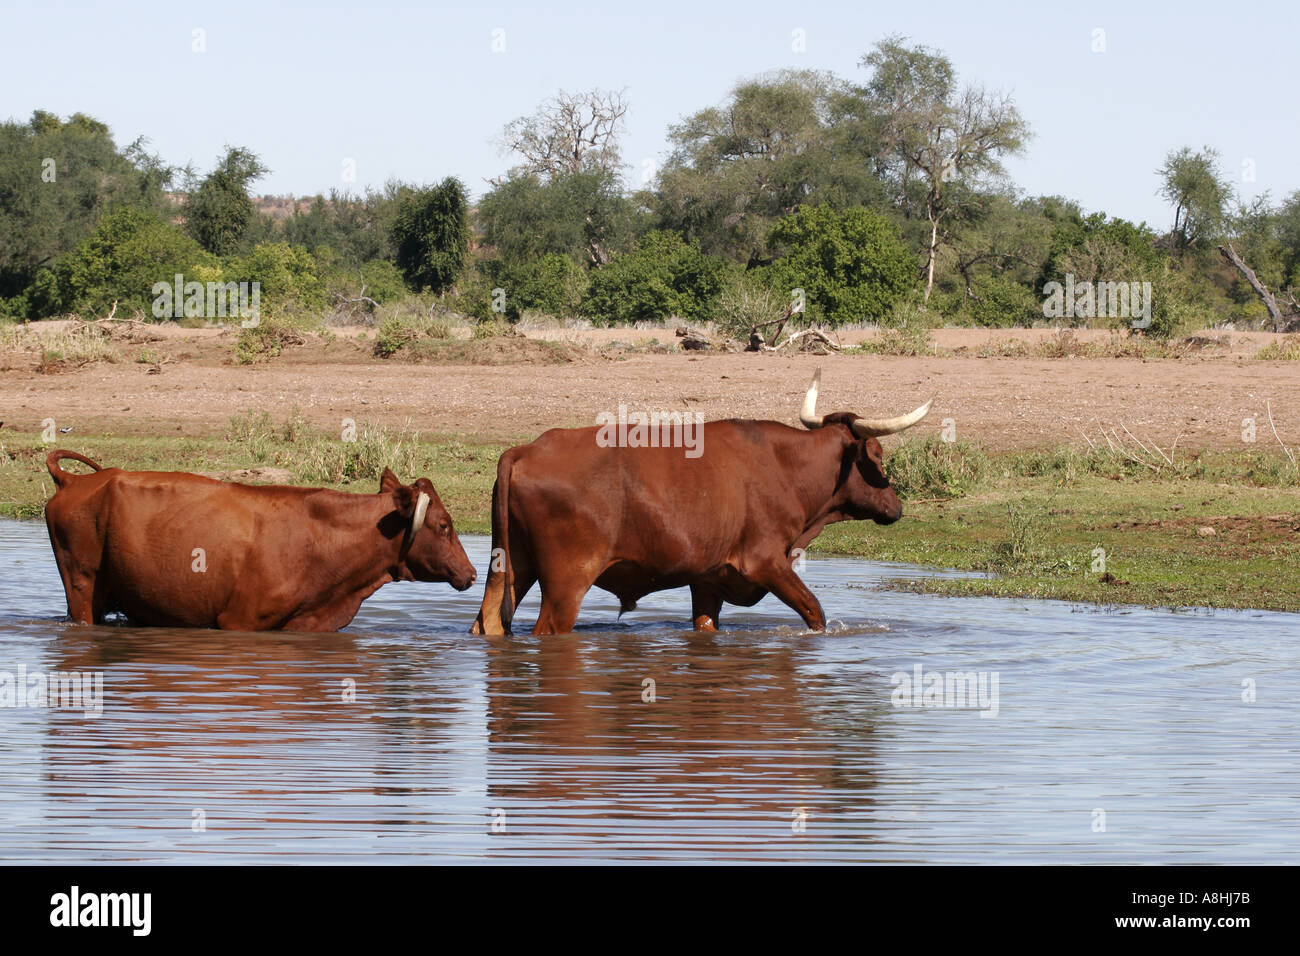 Cattle wading in water Limpopo river Stock Photo